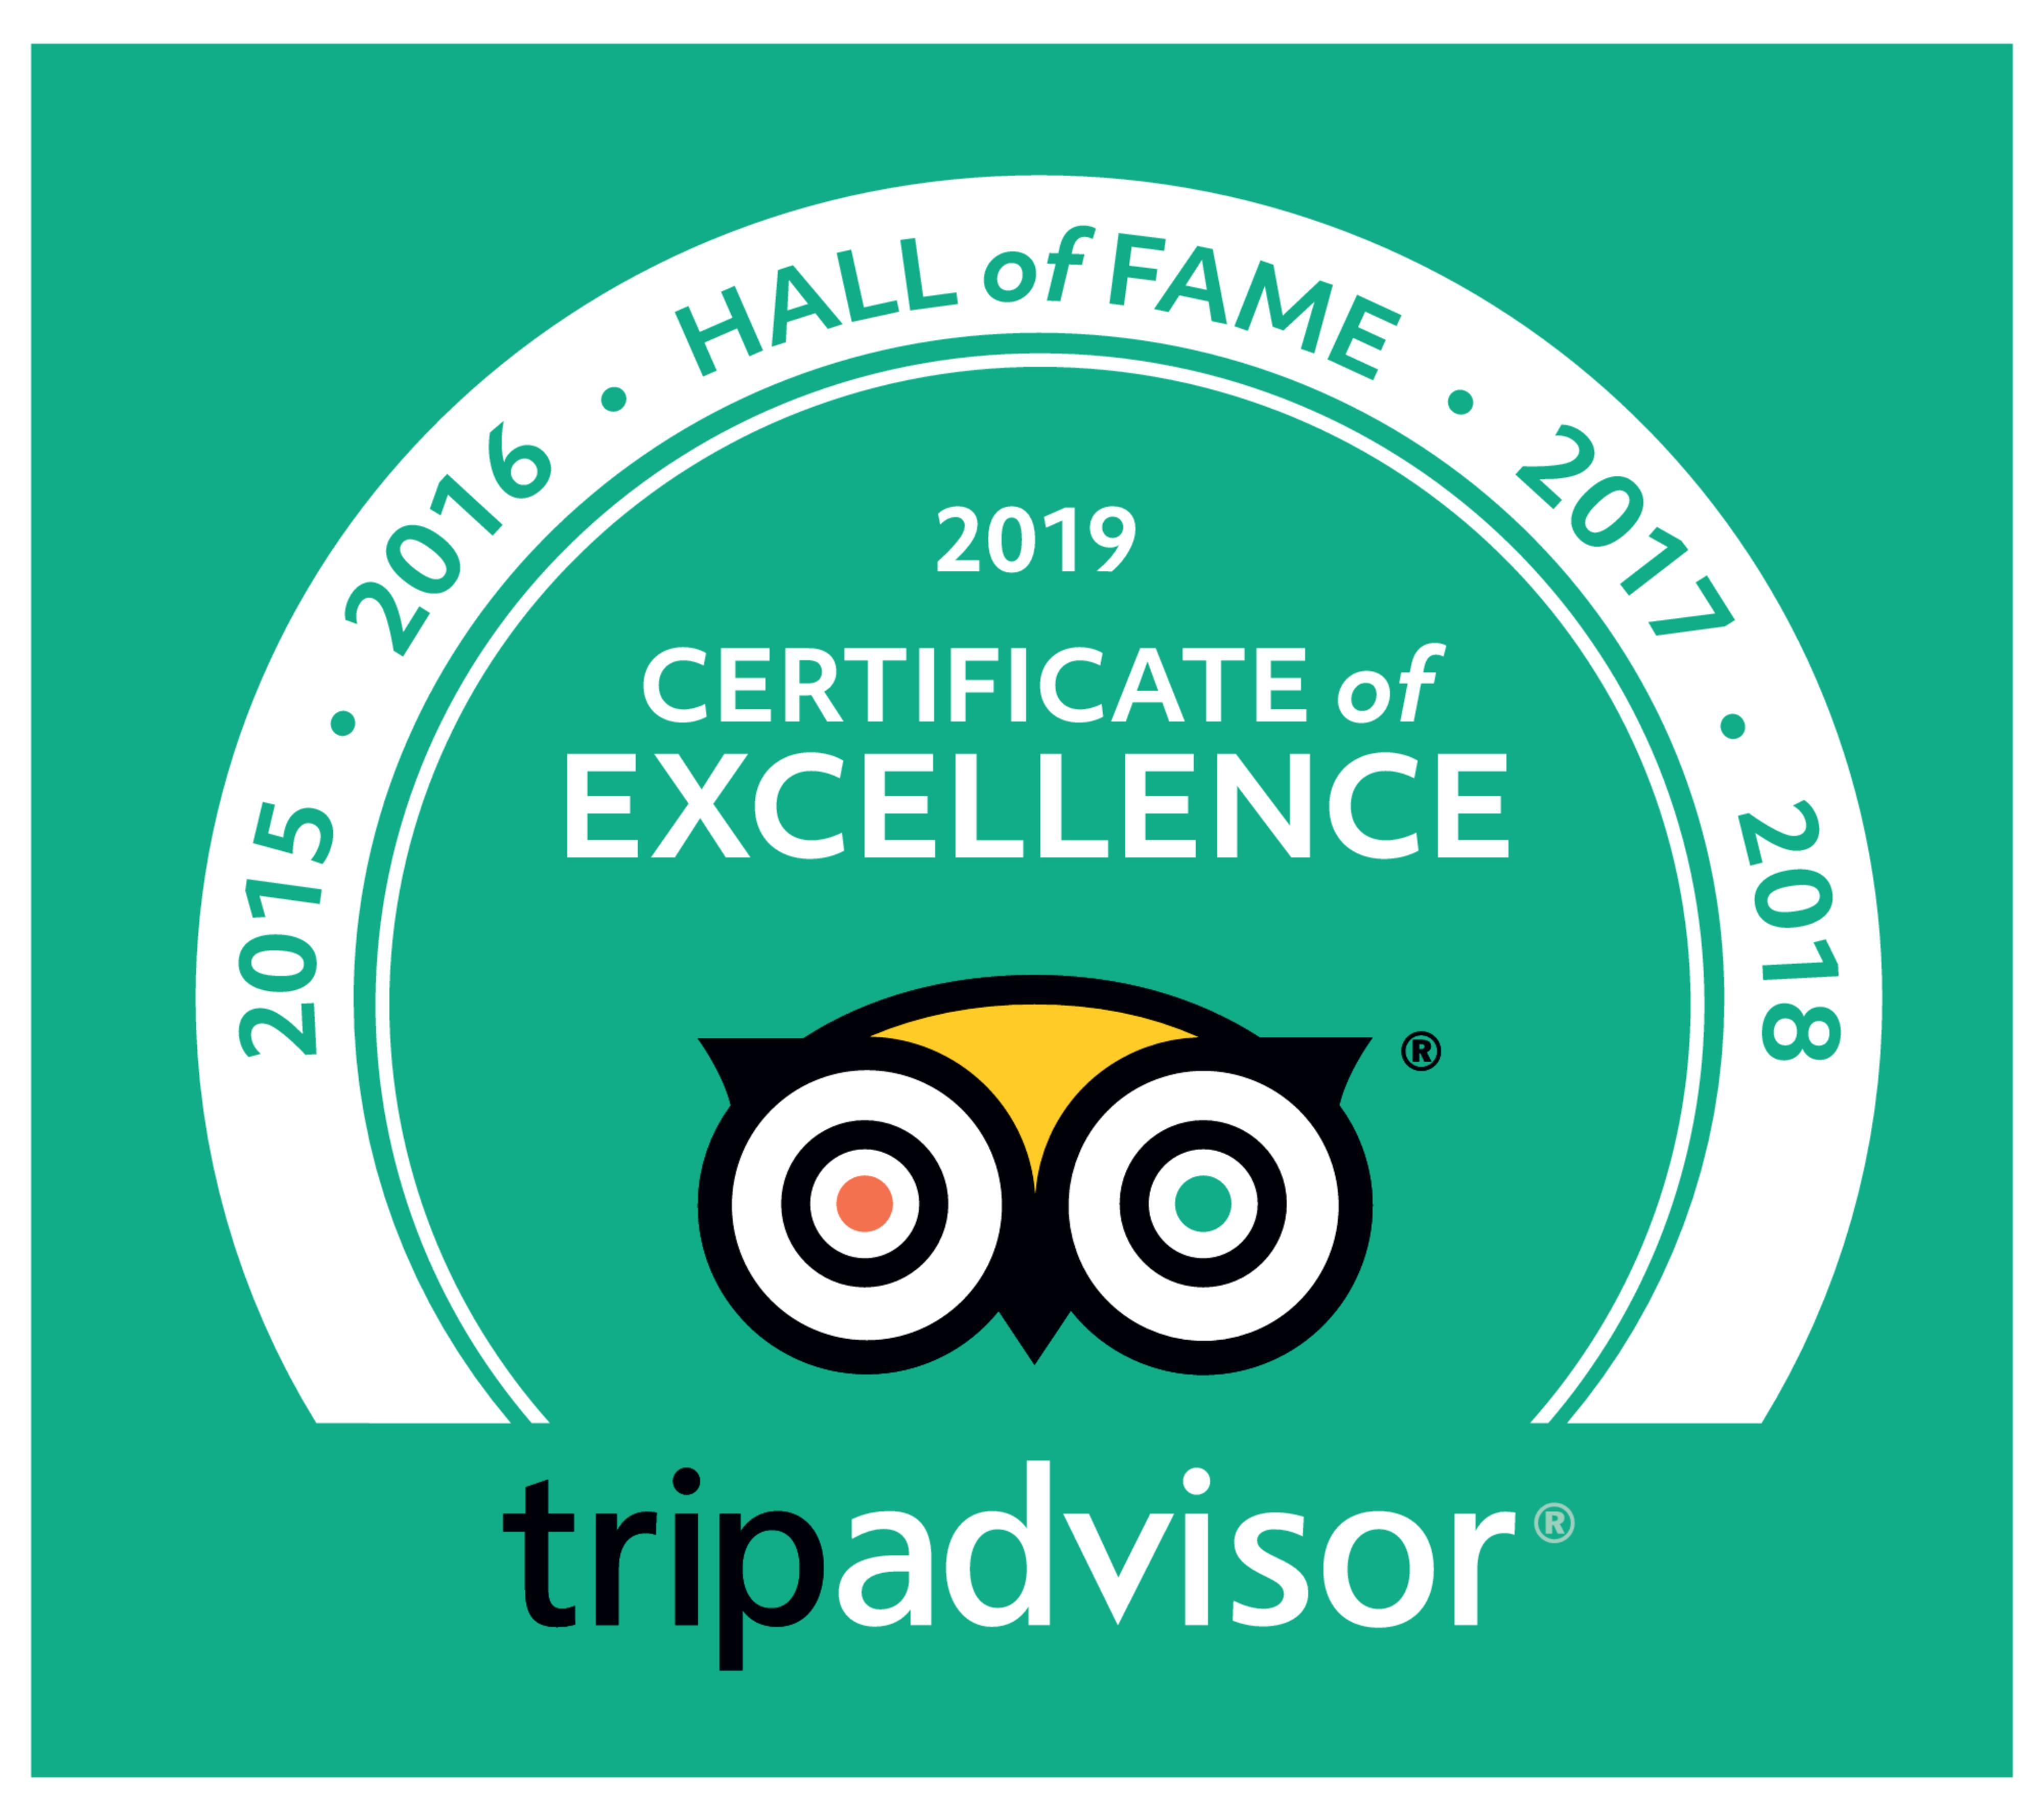 Highly rated Trip Advisor activity